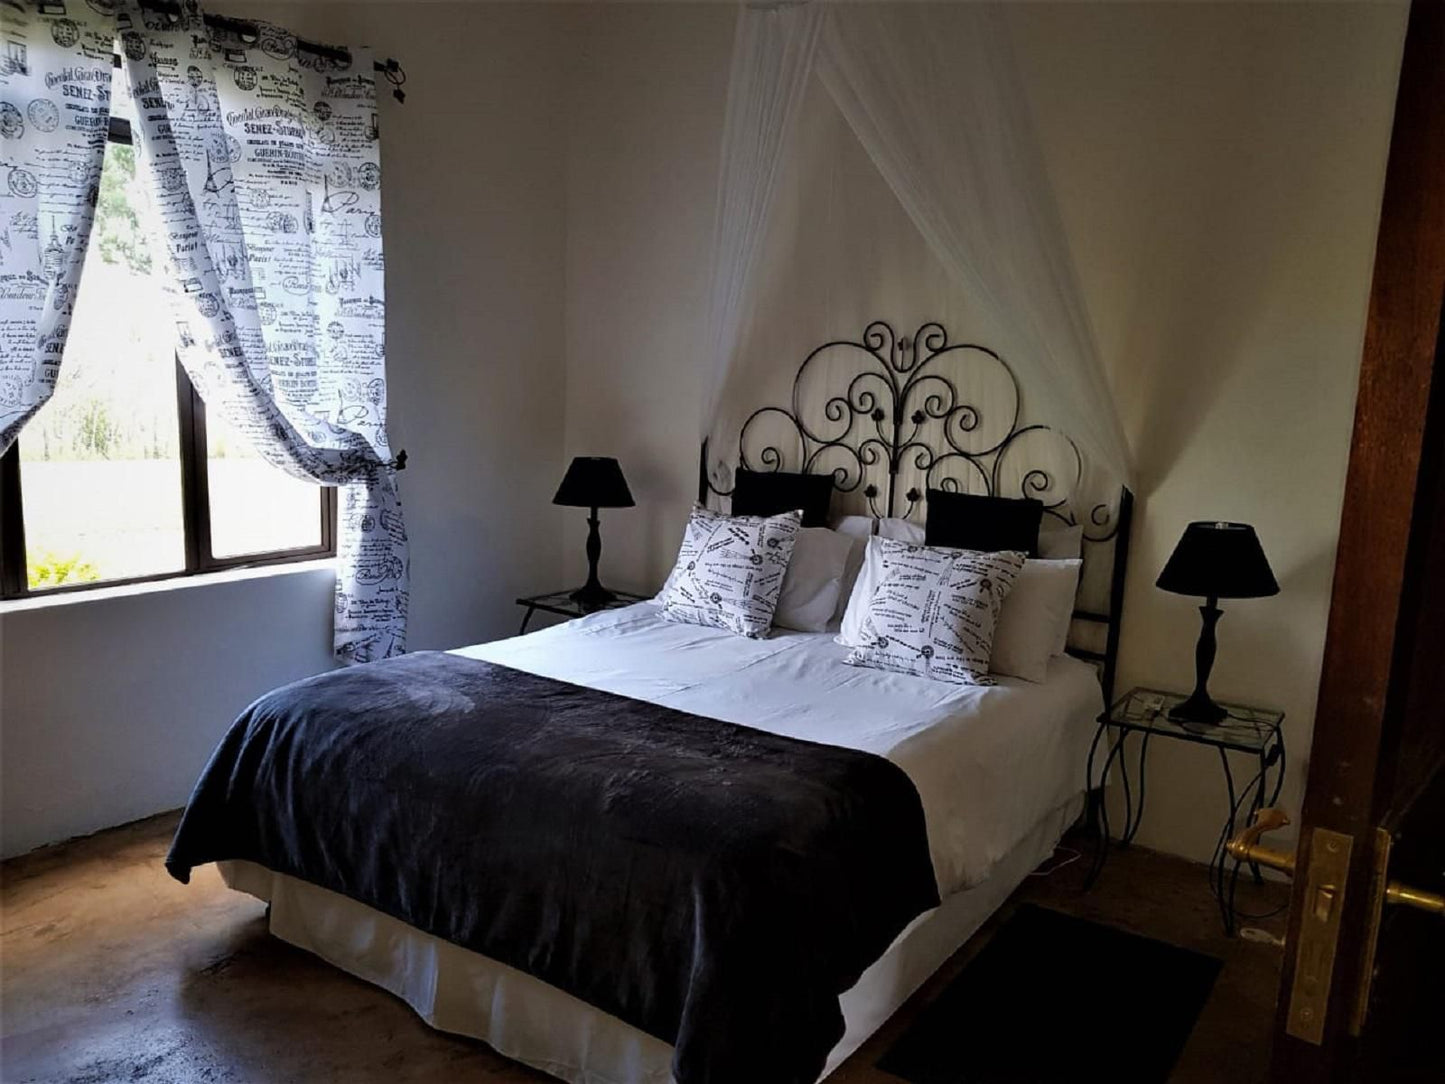 River Crossing Berg Accommodation Champagne Valley Kwazulu Natal South Africa Bedroom